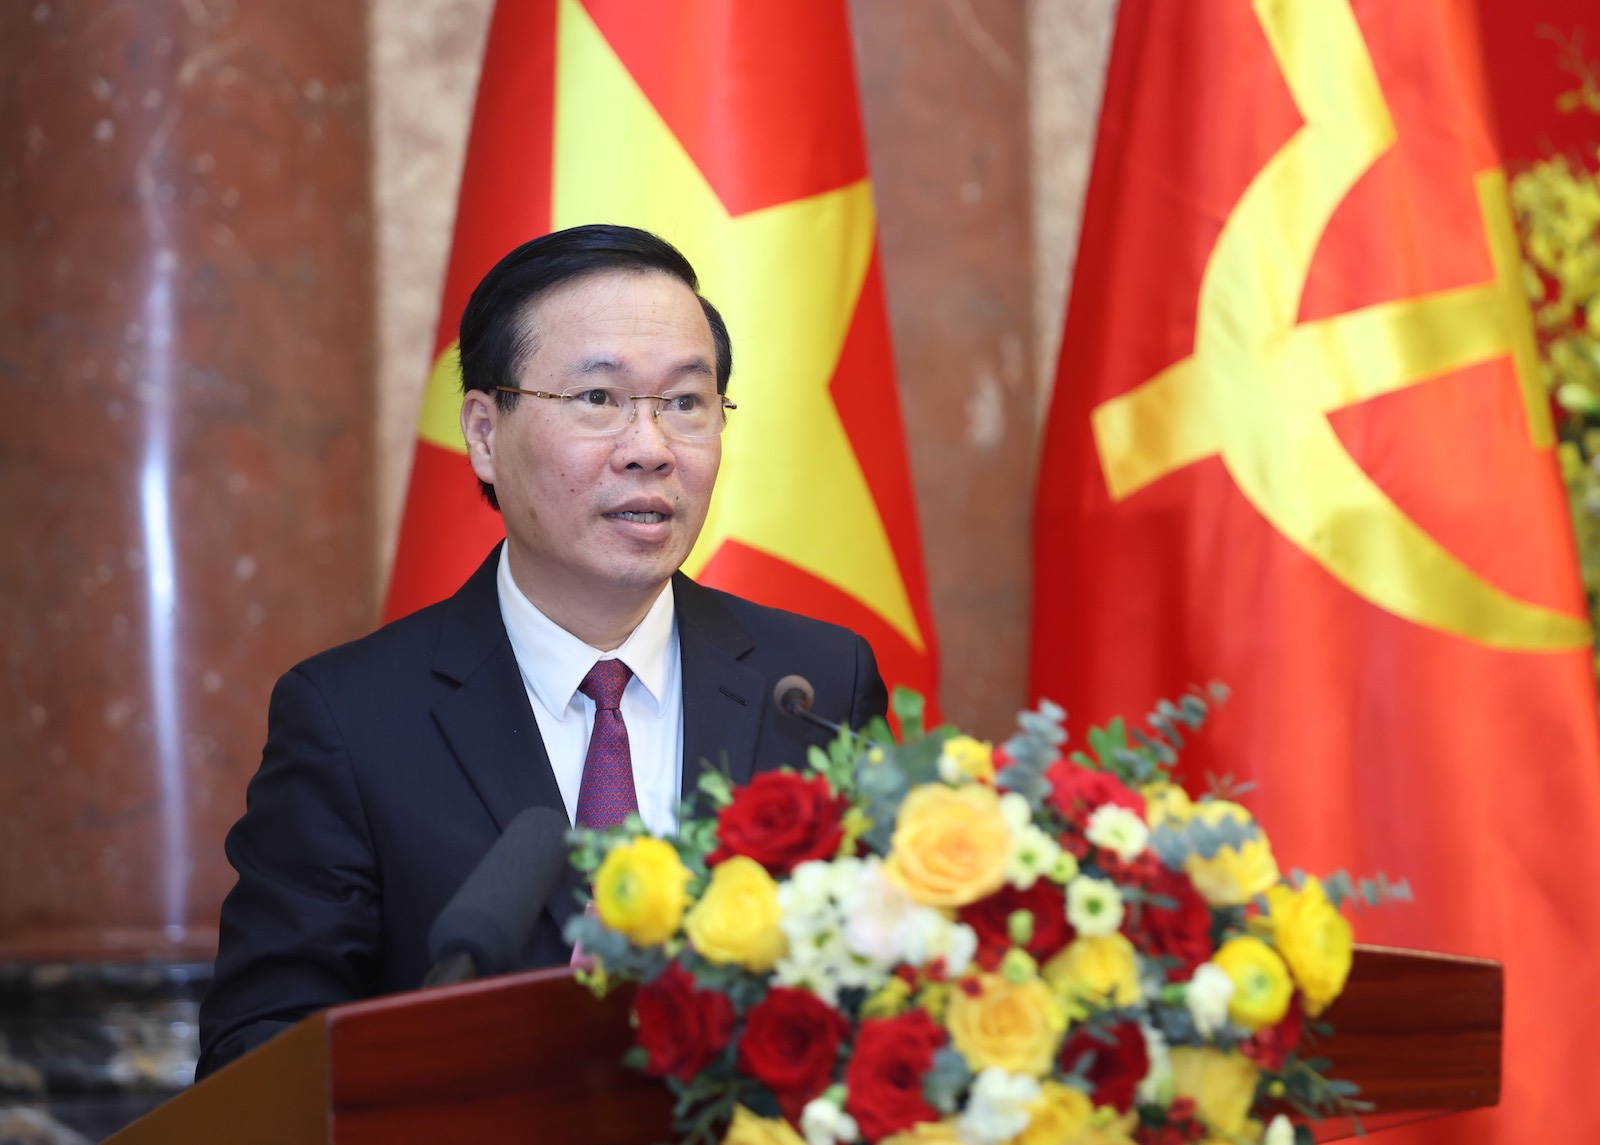 Vietnam’s state president commutes death sentences to life imprisonment for 5 inmates